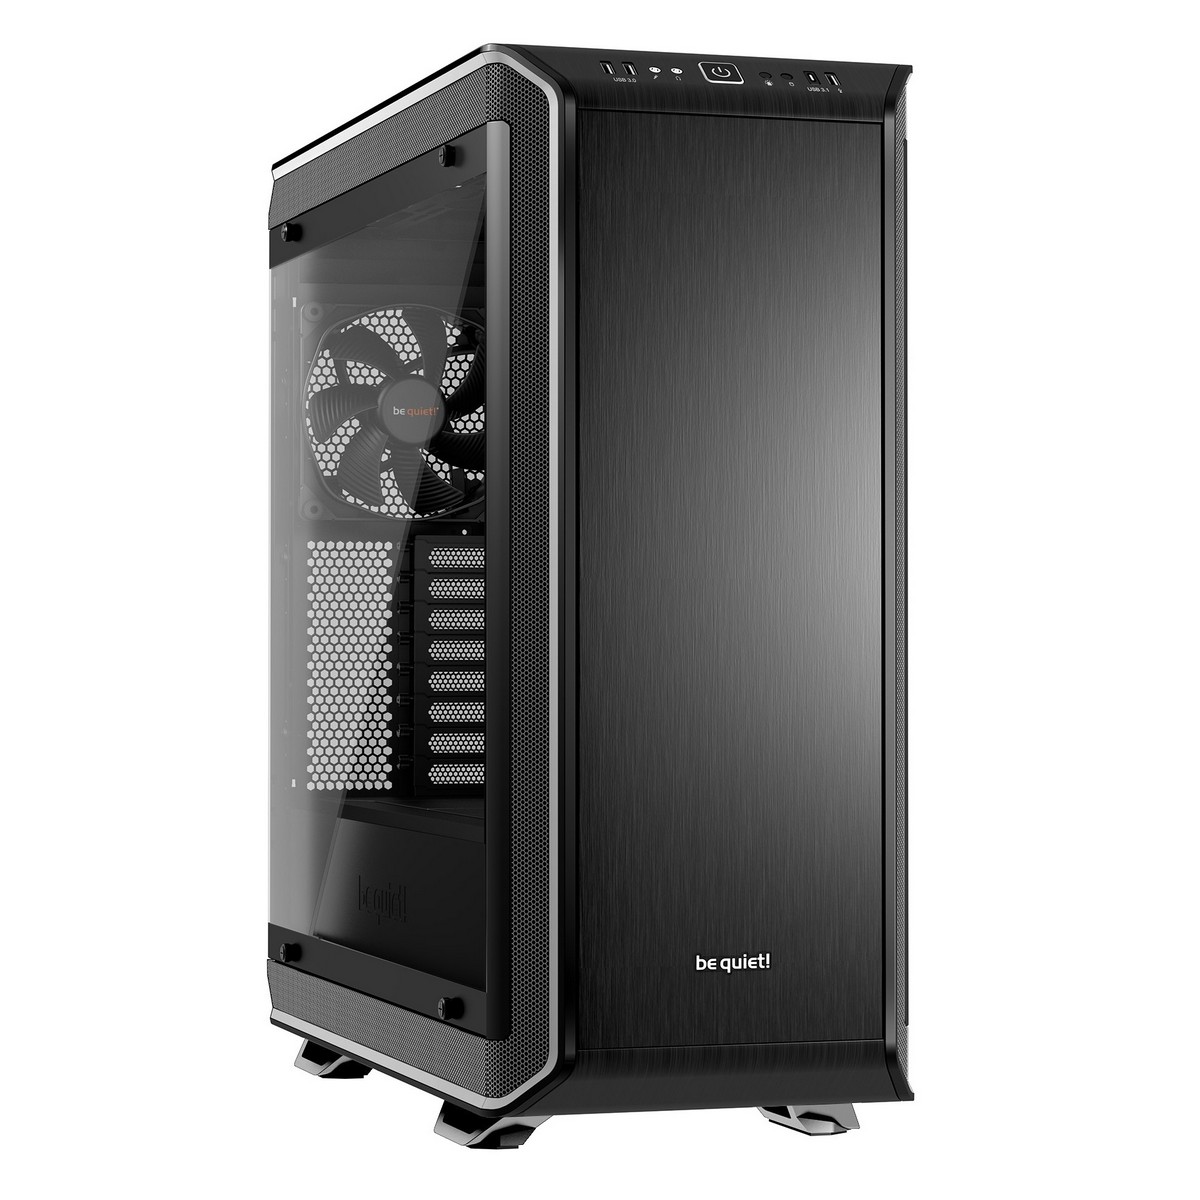 be quiet! - be quiet Dark Base Pro 900 Rev.2 Full Tower Gaming Case - Silver Tempered G